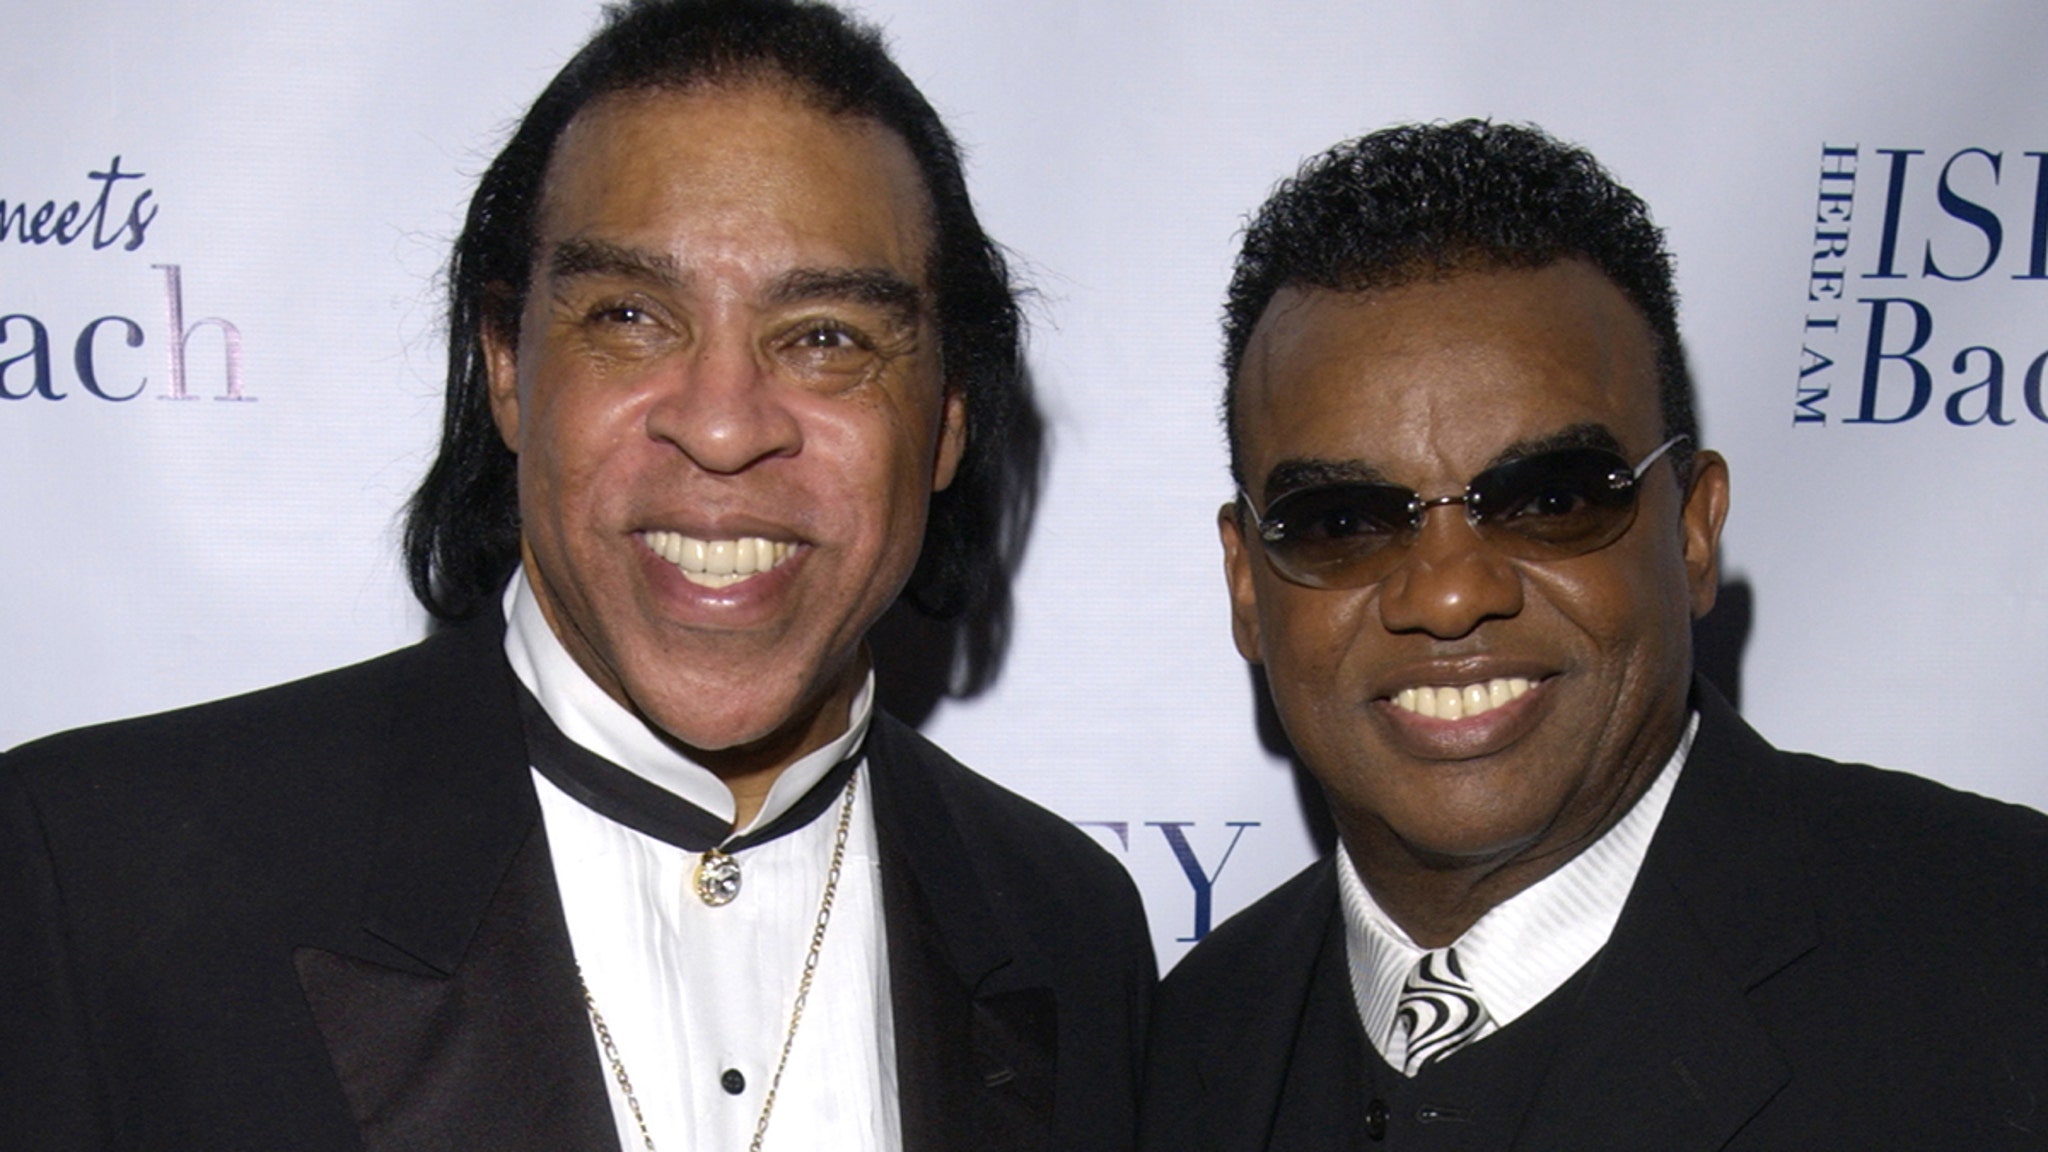 Why The Isley Brothers' Rudolph Isley is suing brother Ronald Isley